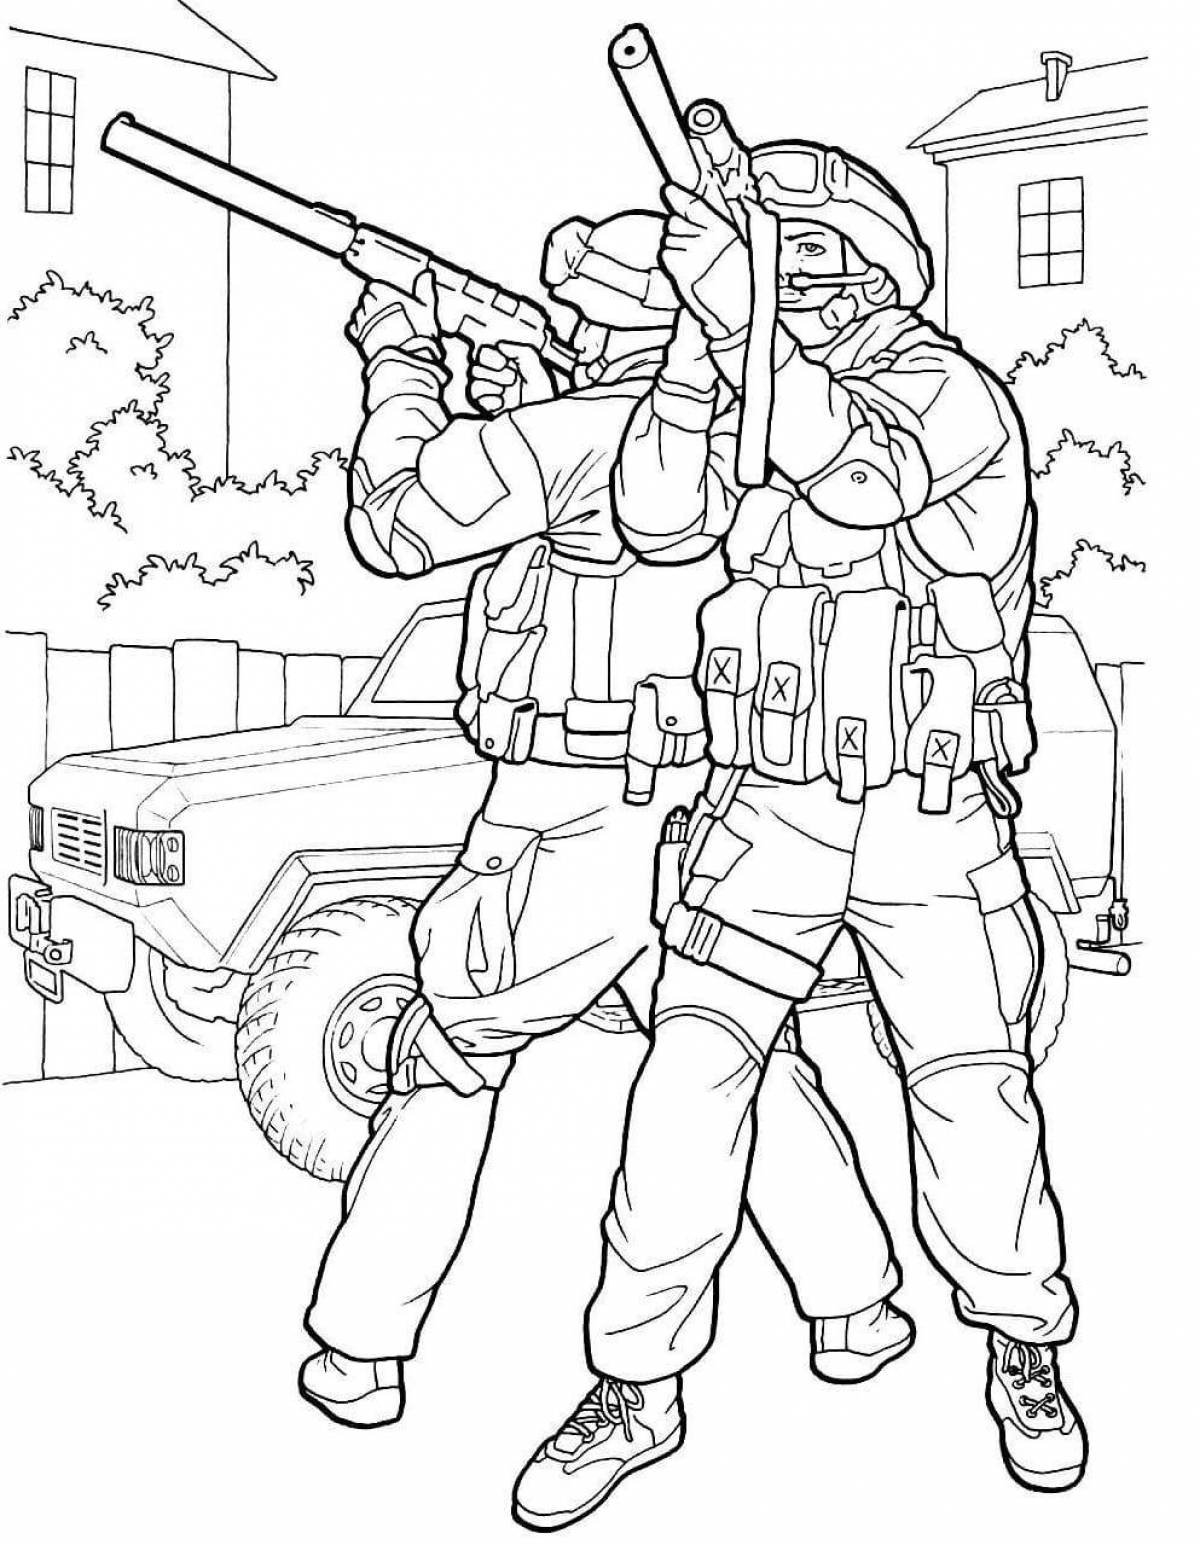 Fabulous special forces coloring pages for kids